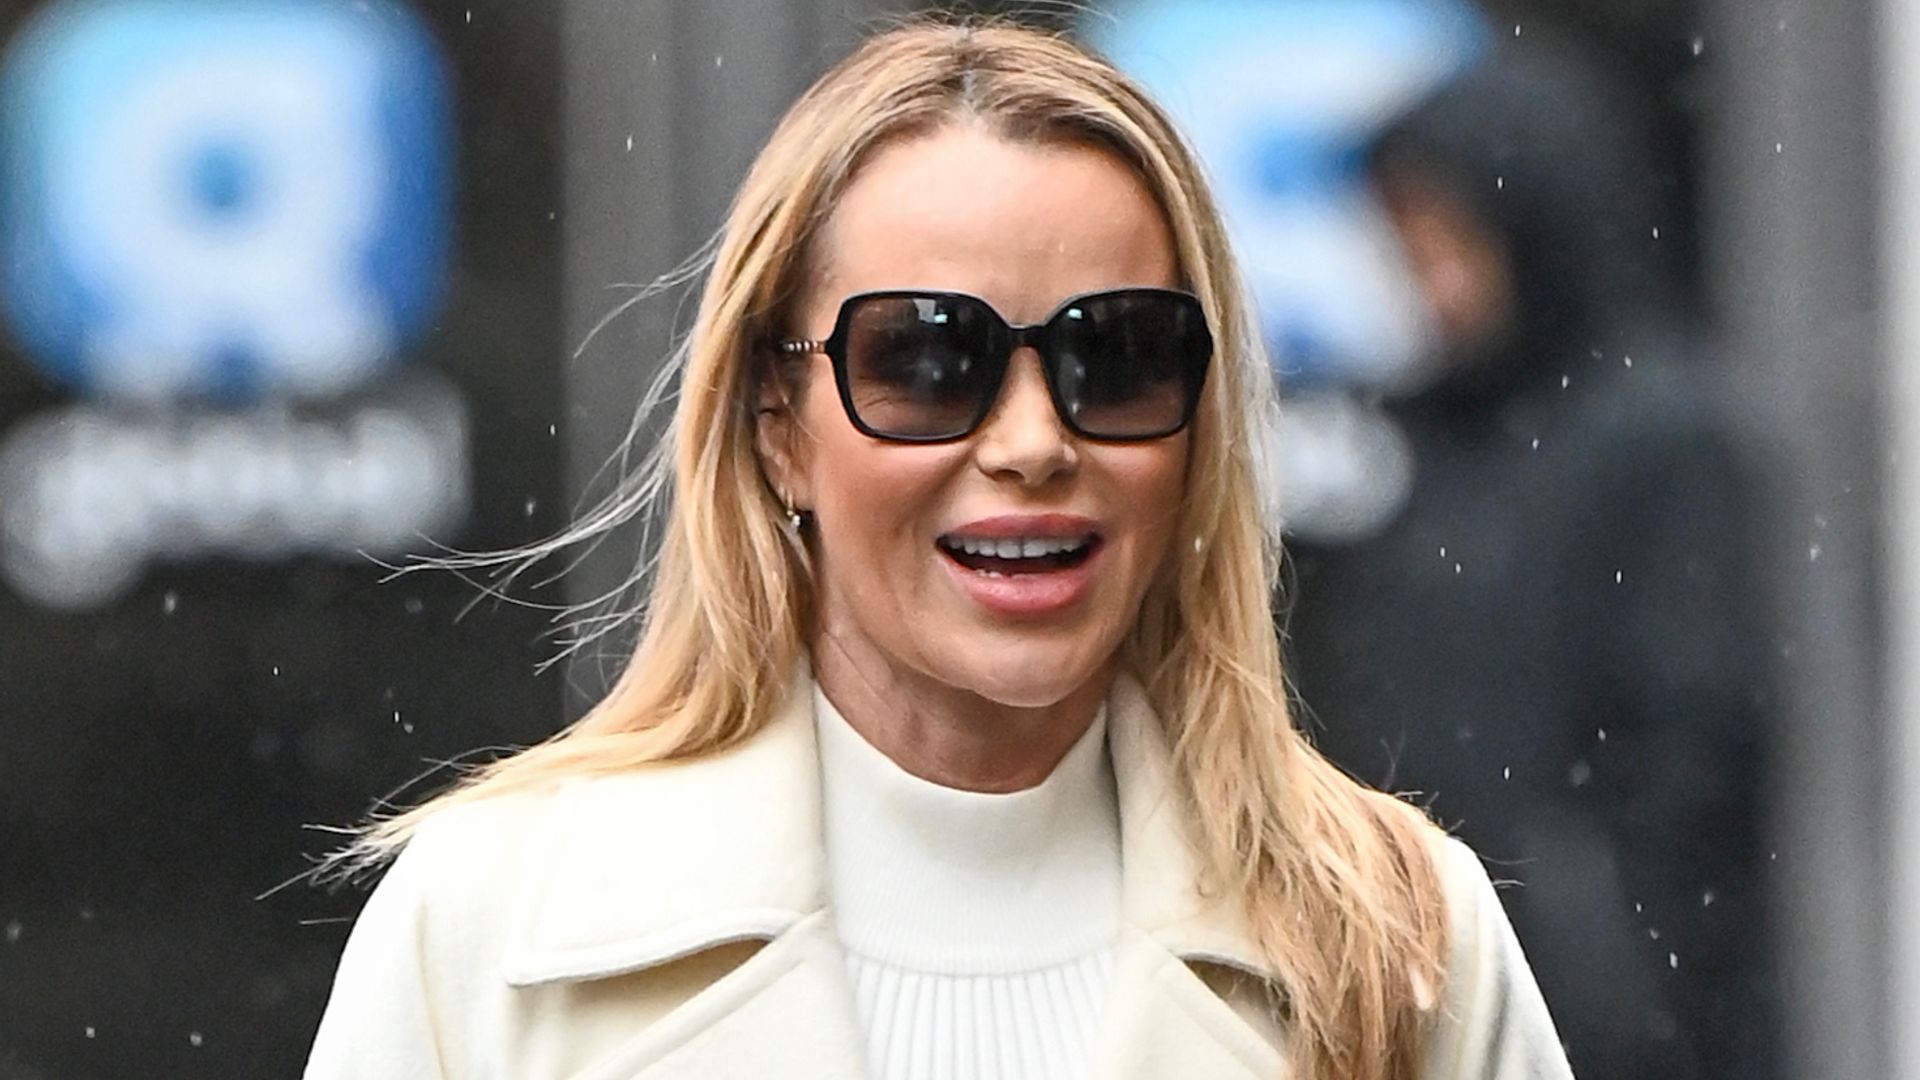 Amanda Holden in an all-white outfit